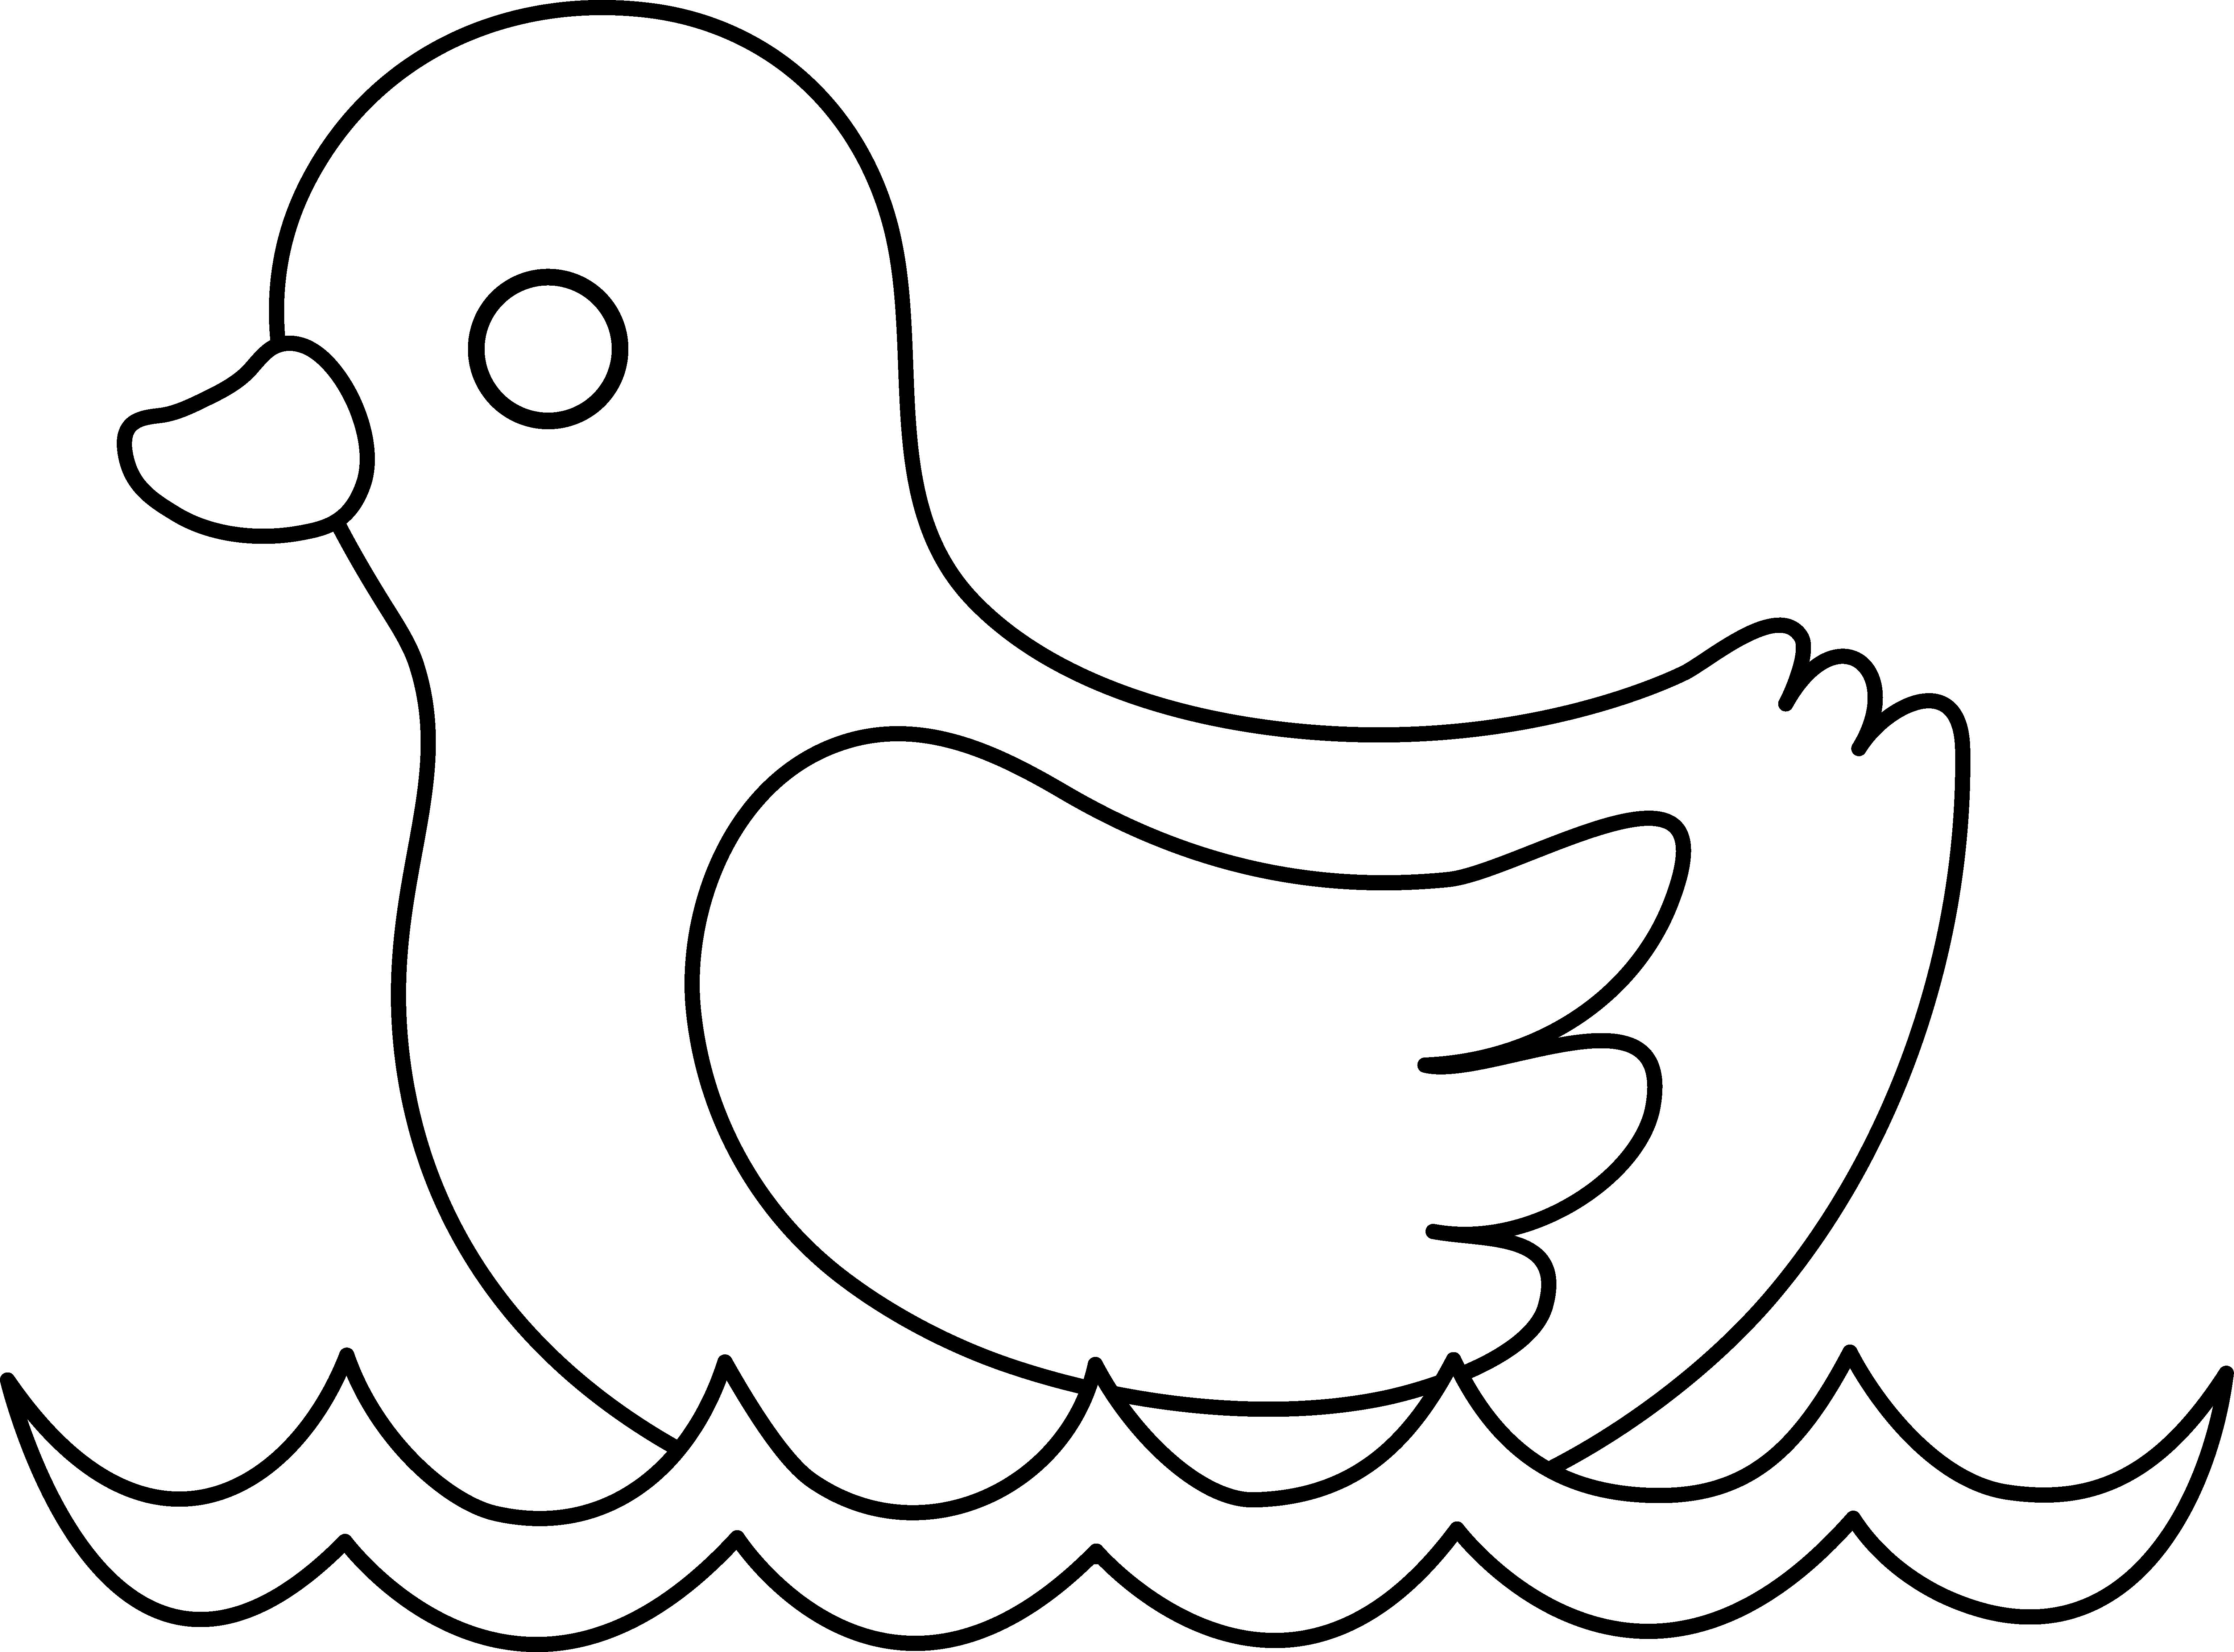 Duck panda free images. Ducks clipart black and white